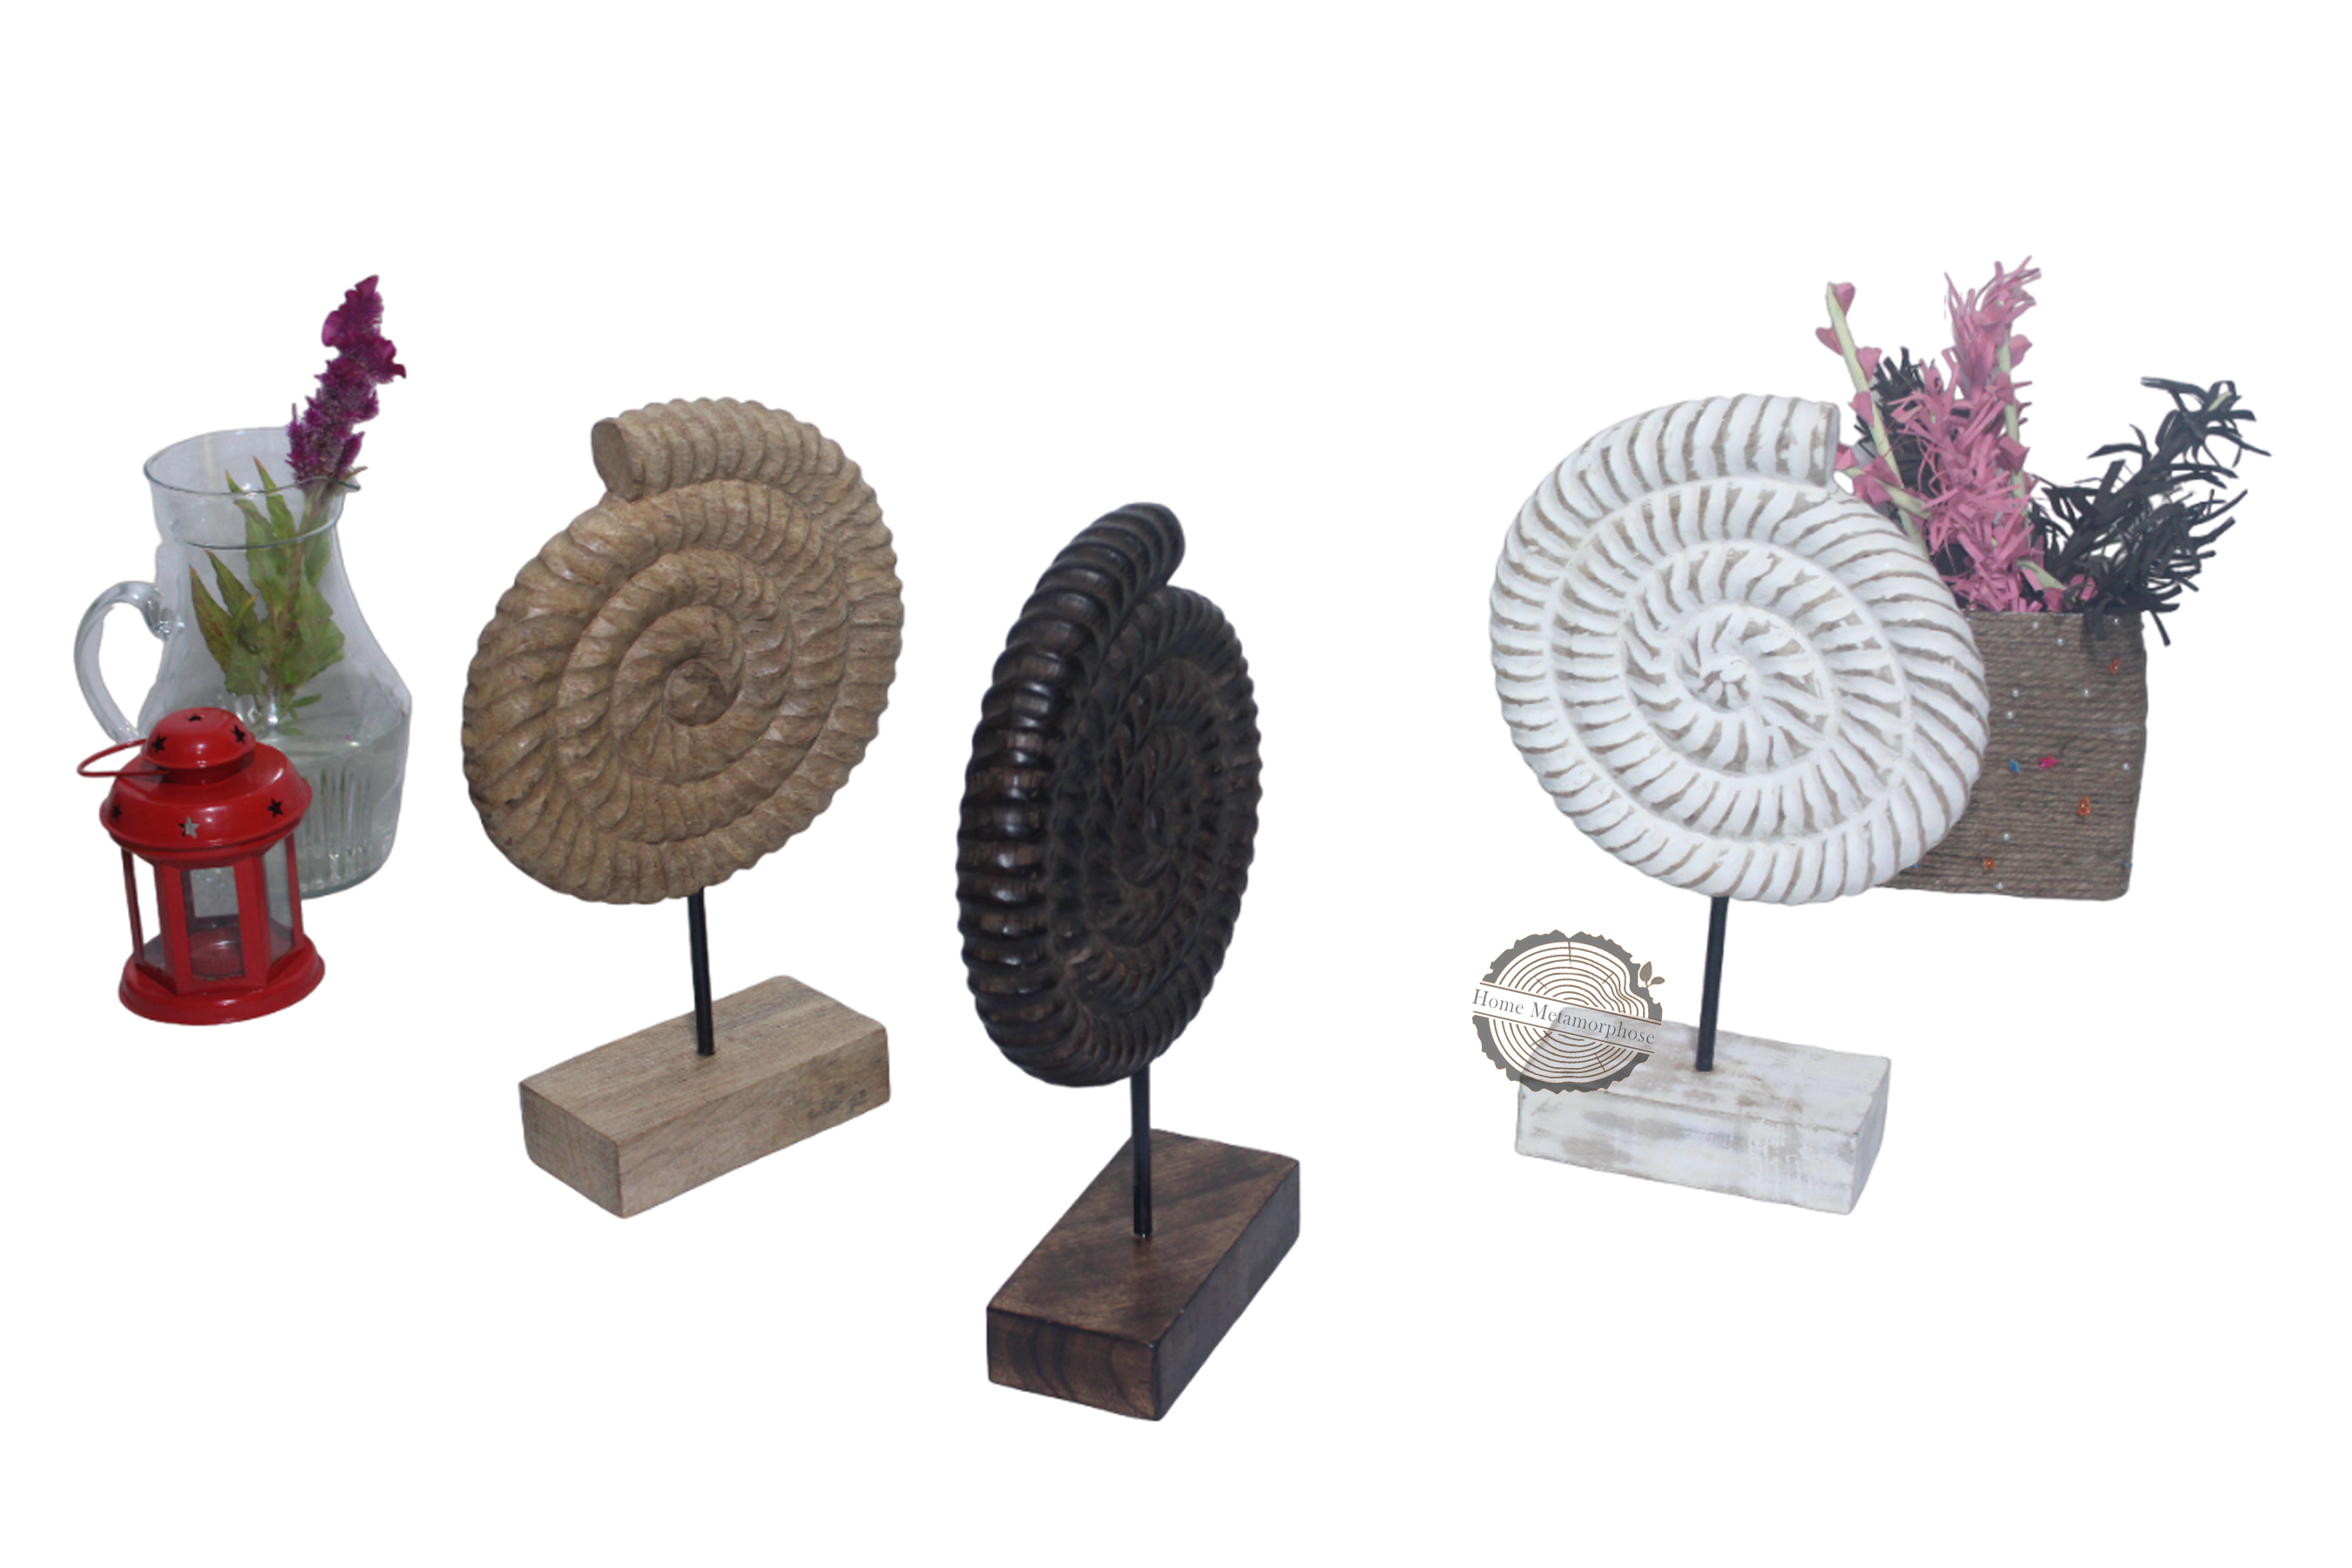 Wooden Fossil home decor, Wooden Ornamental Sculpture on Stand, Home Office Display Decorative Craft Box Decoration, Ammonite Fossil on Stand,Unique Gift, Home Decor, Tabletop Decor, Fossil Decor